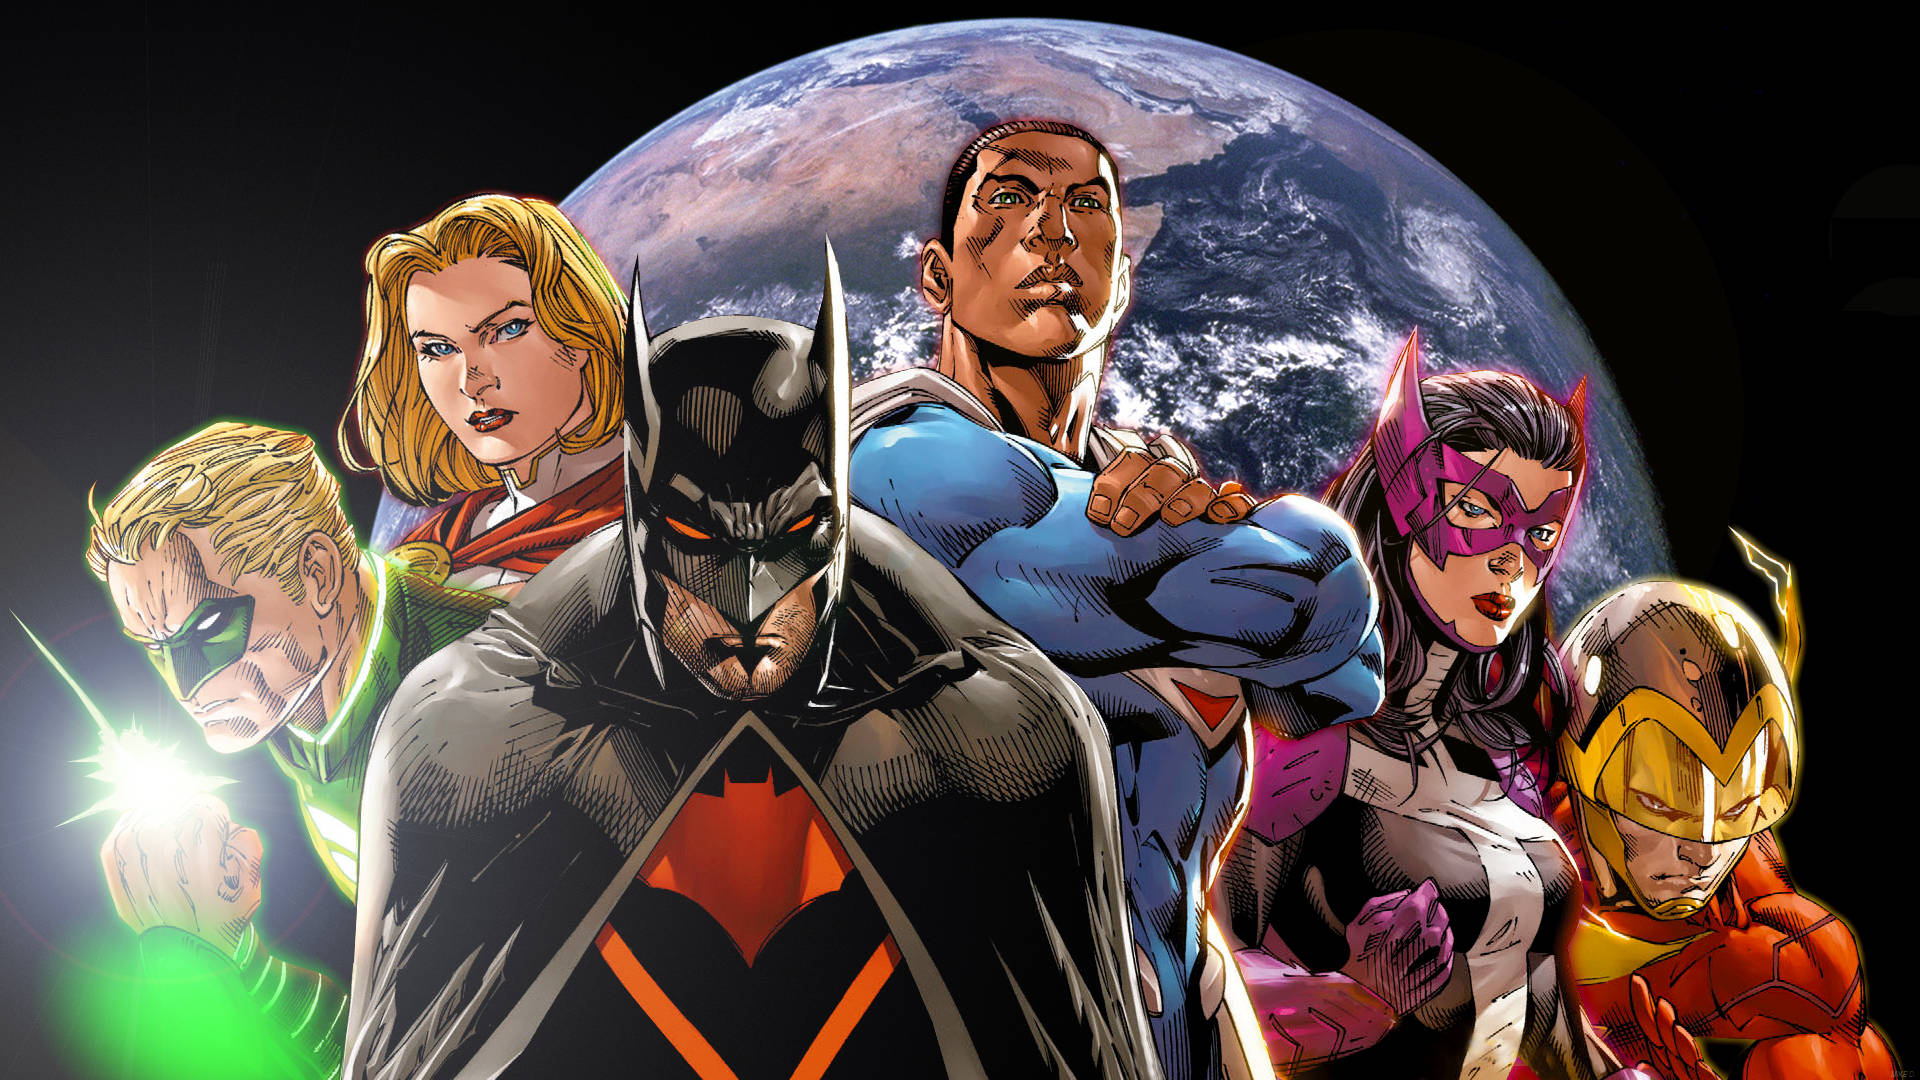 Download Justice Society Of America Earth 2 World End Wallpaper | Wallpapers .com